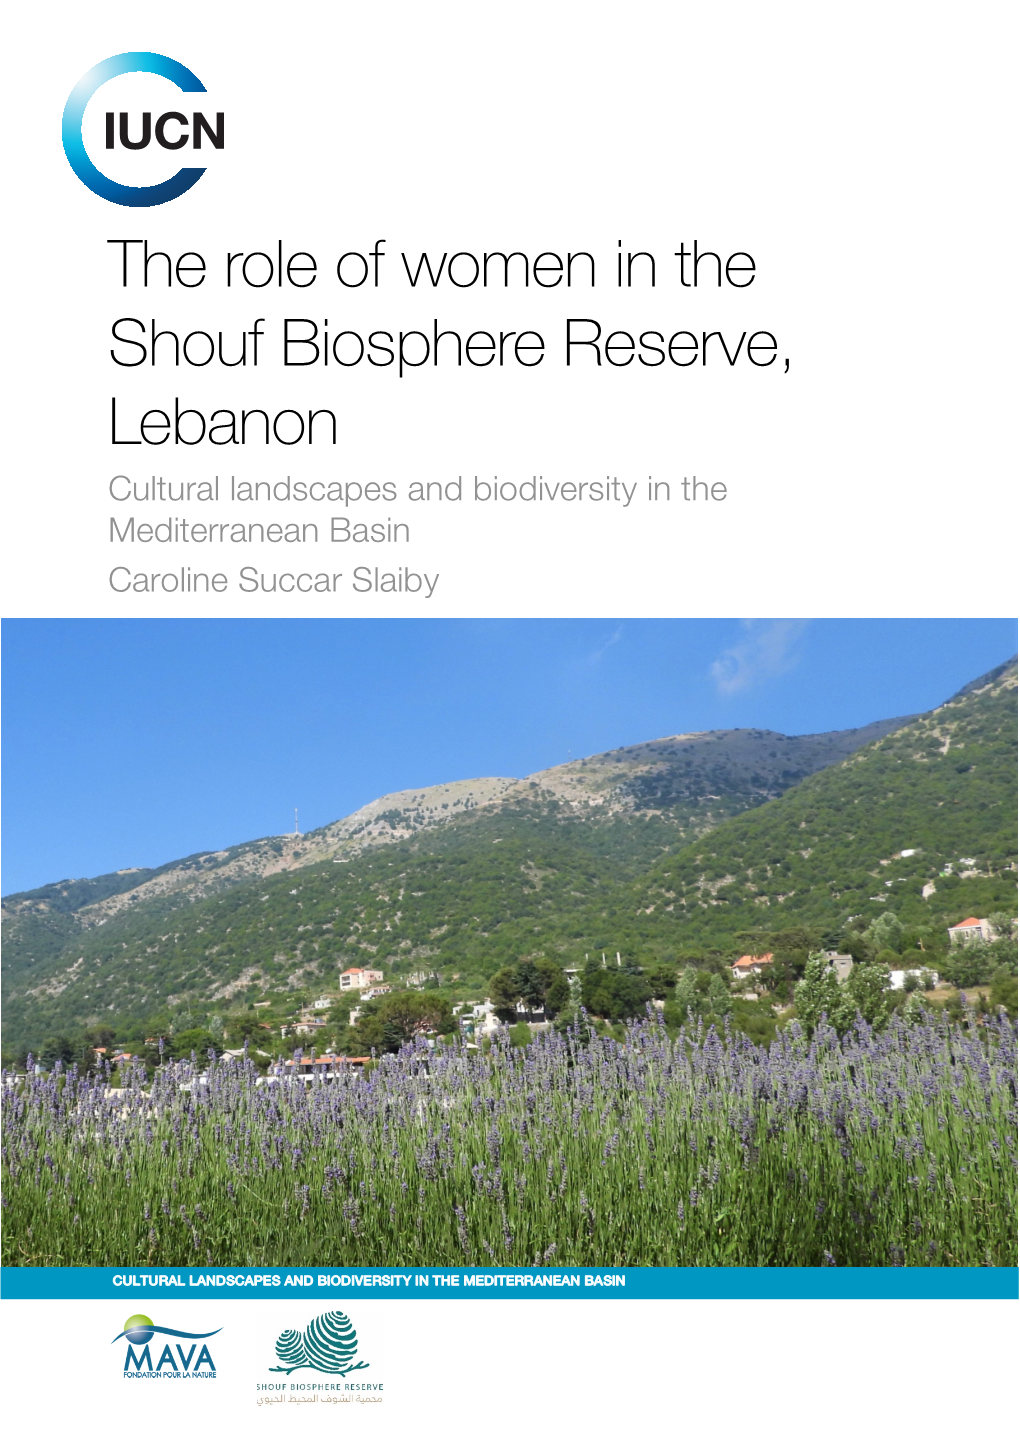 The Role of Women in the Shouf Biosphere Reserve, Lebanon